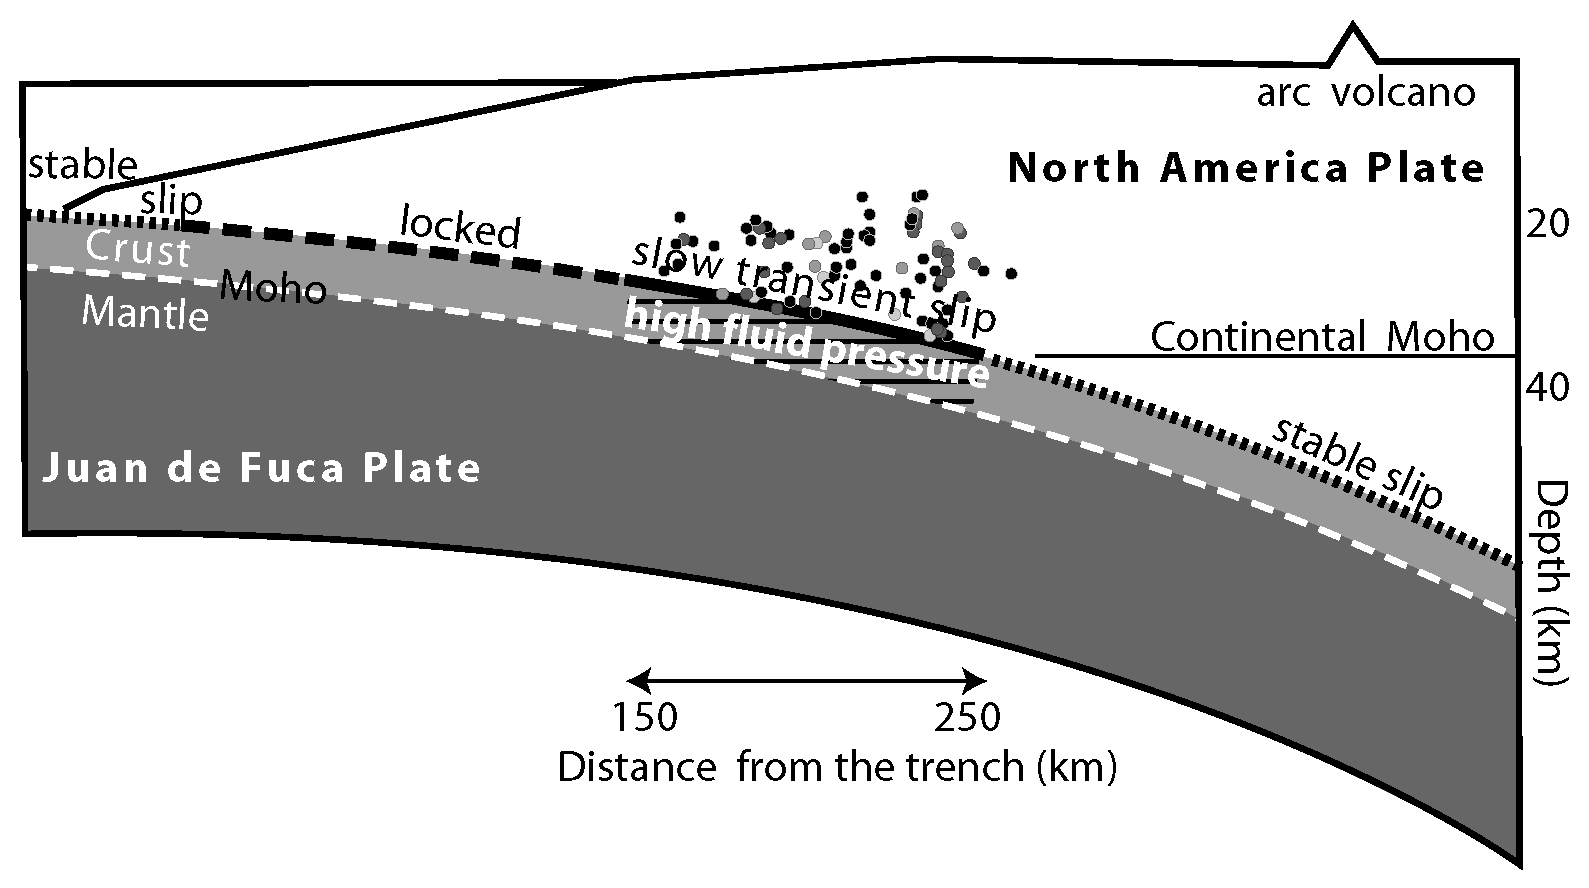 Cross section through Cascadia subduction zone showing subdivision into a zone of stable sliding closest to the trench, the locked zone subject to great earthquakes, the zone of episodic tremor and slip, possibly related to high fluid pressure (epicenters in Fig. 4-25), and deep zone of stable sliding extending beneath the volcanic arc